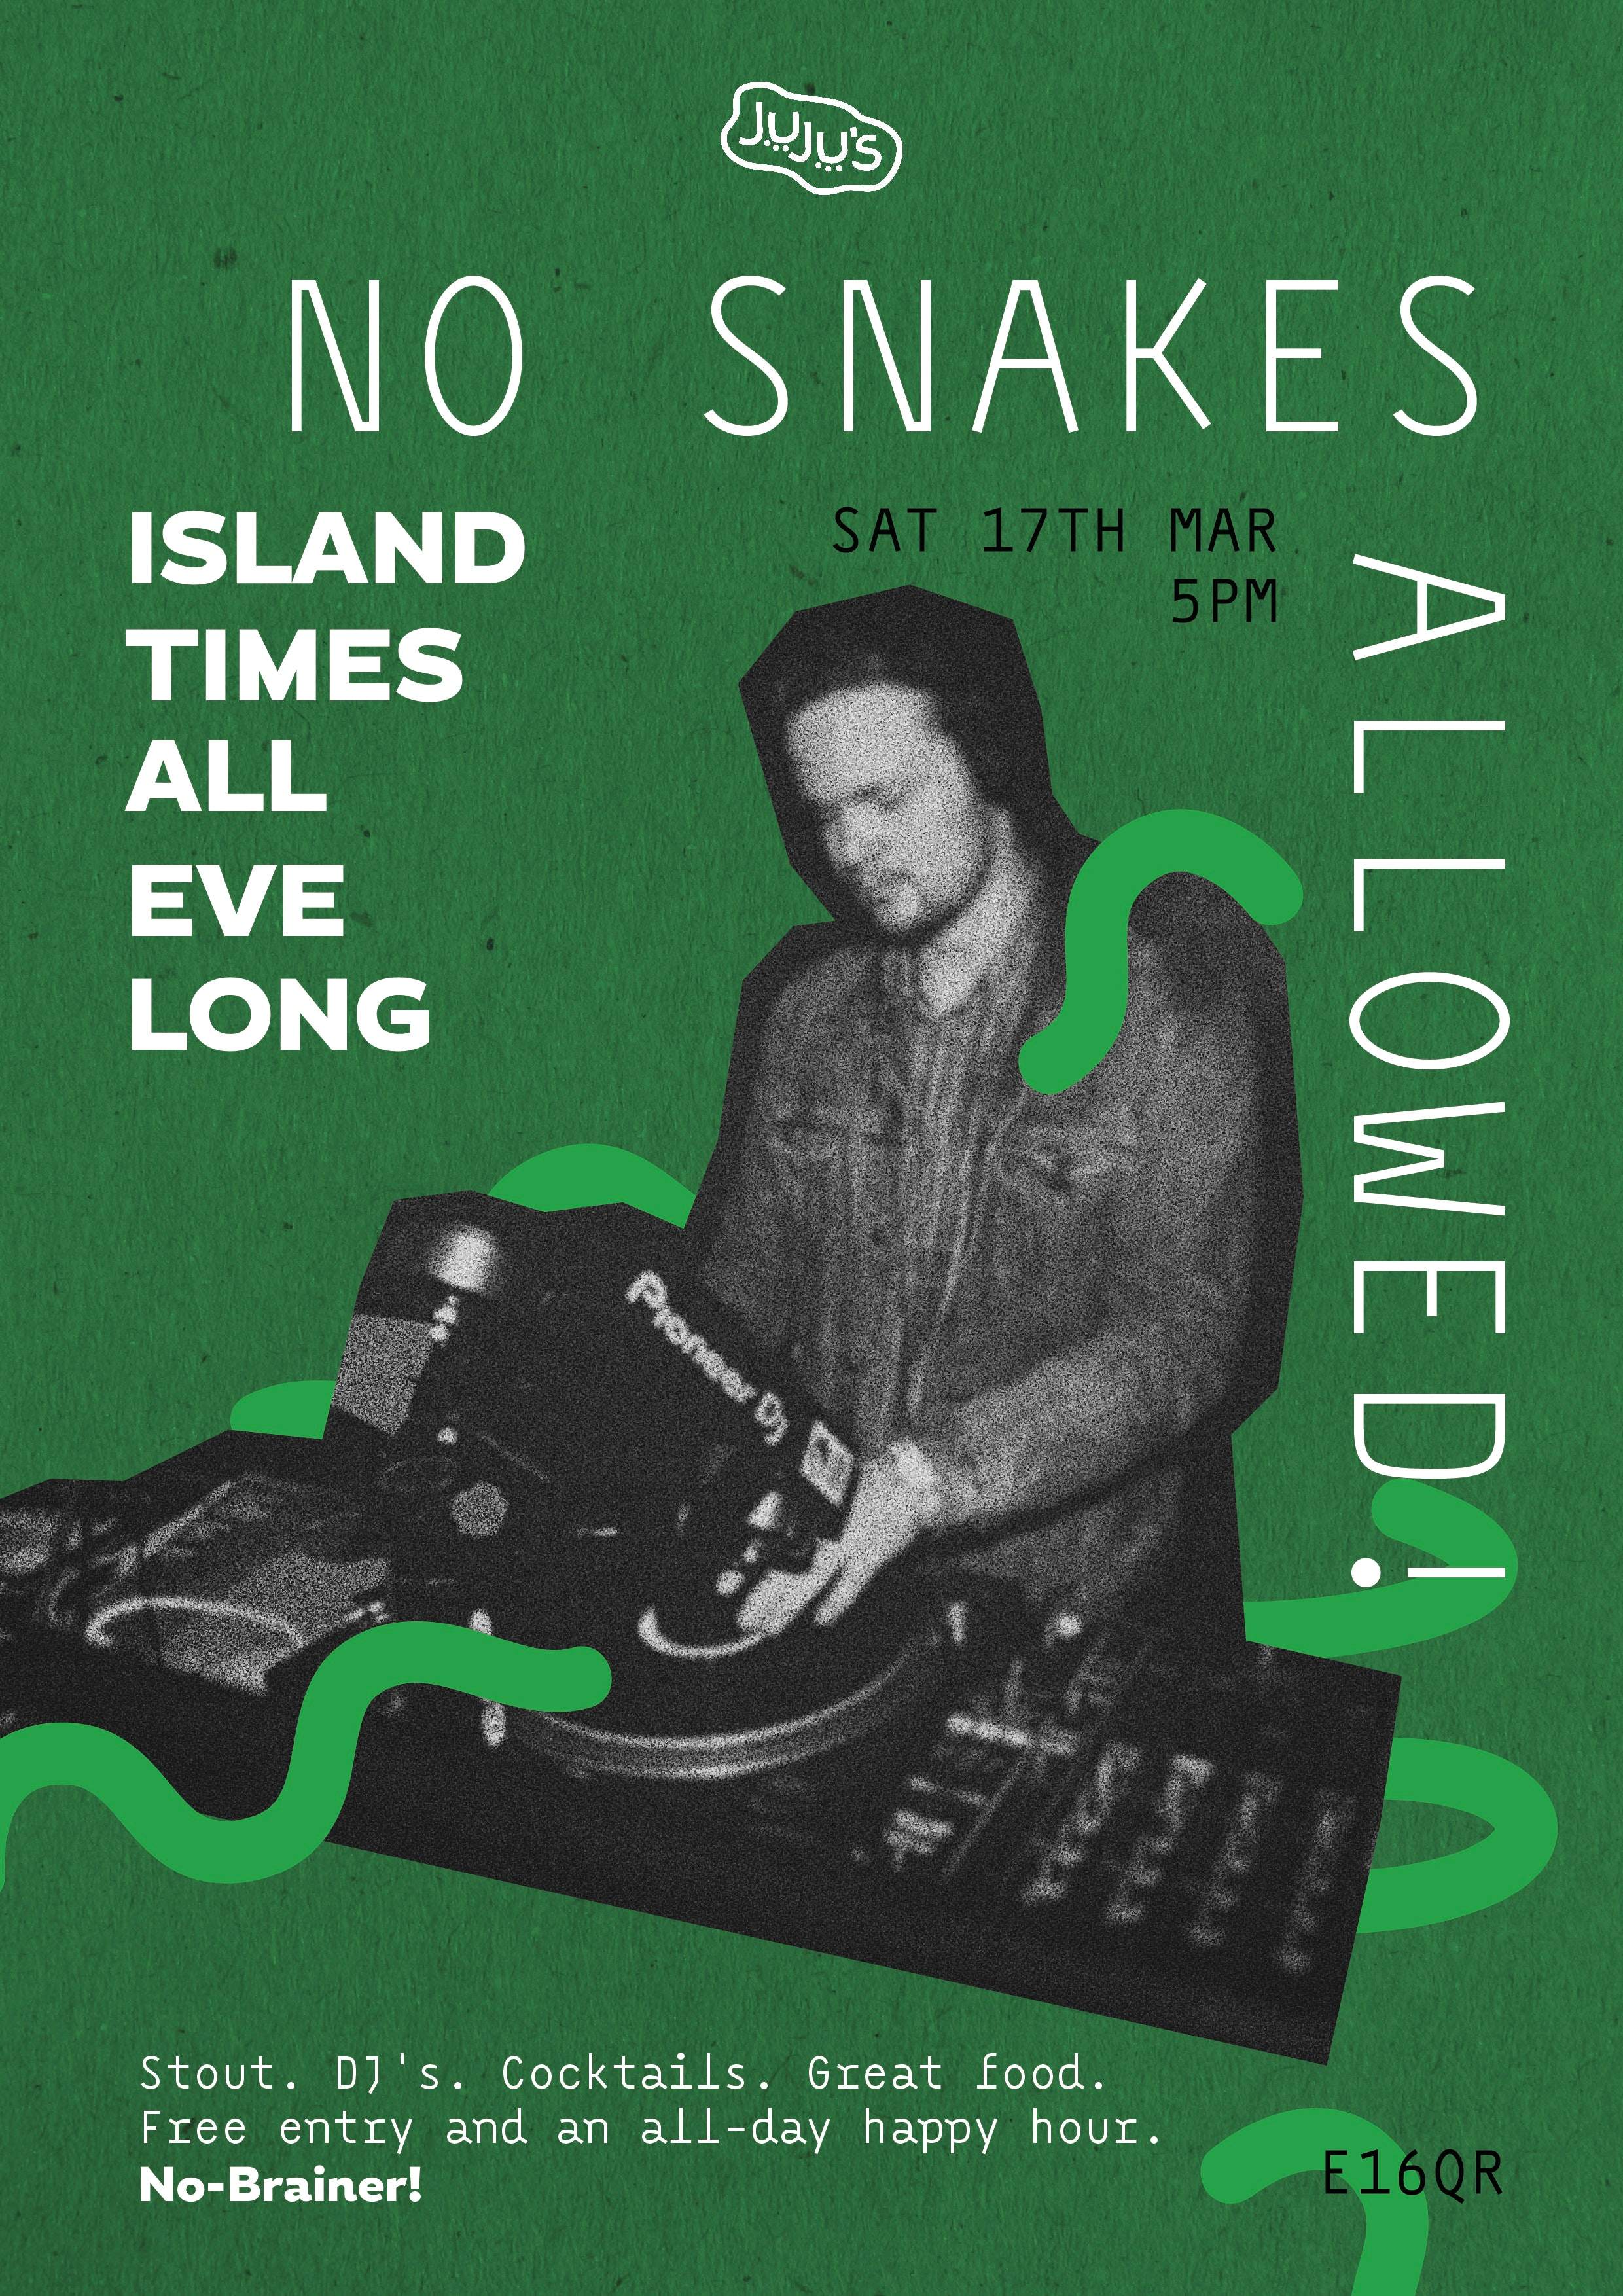 Juju's - No Snakes Allowed! Island Times All Eve Long - フライヤー表